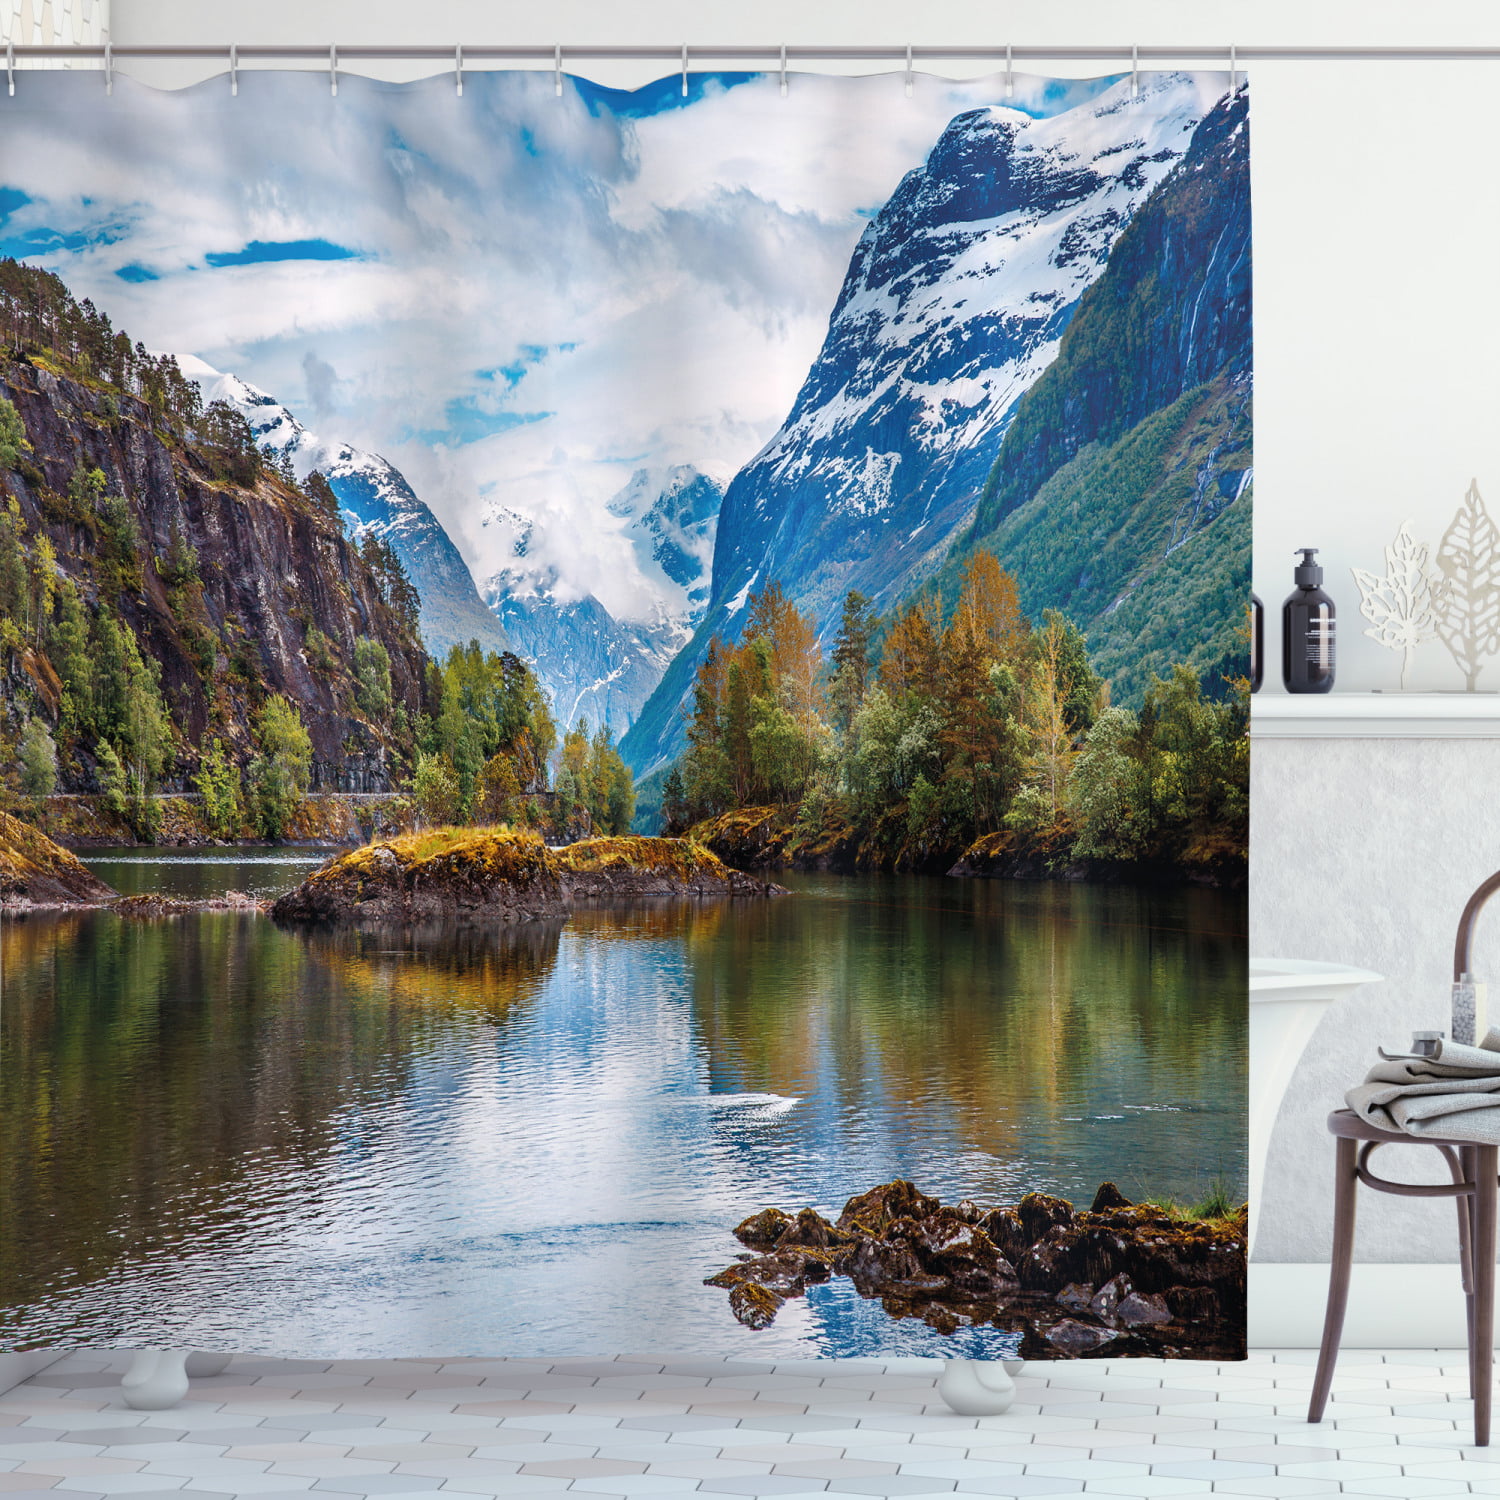 ventilator Behandling Trofast Nature Shower Curtain, Norway Mountain Range with Snowy Peaks by the Lake  Fishing Nordic Northern Landscape, Fabric Bathroom Set with Hooks, 69W X  84L Inches Extra Long, Multicolor, by Ambesonne - Walmart.com